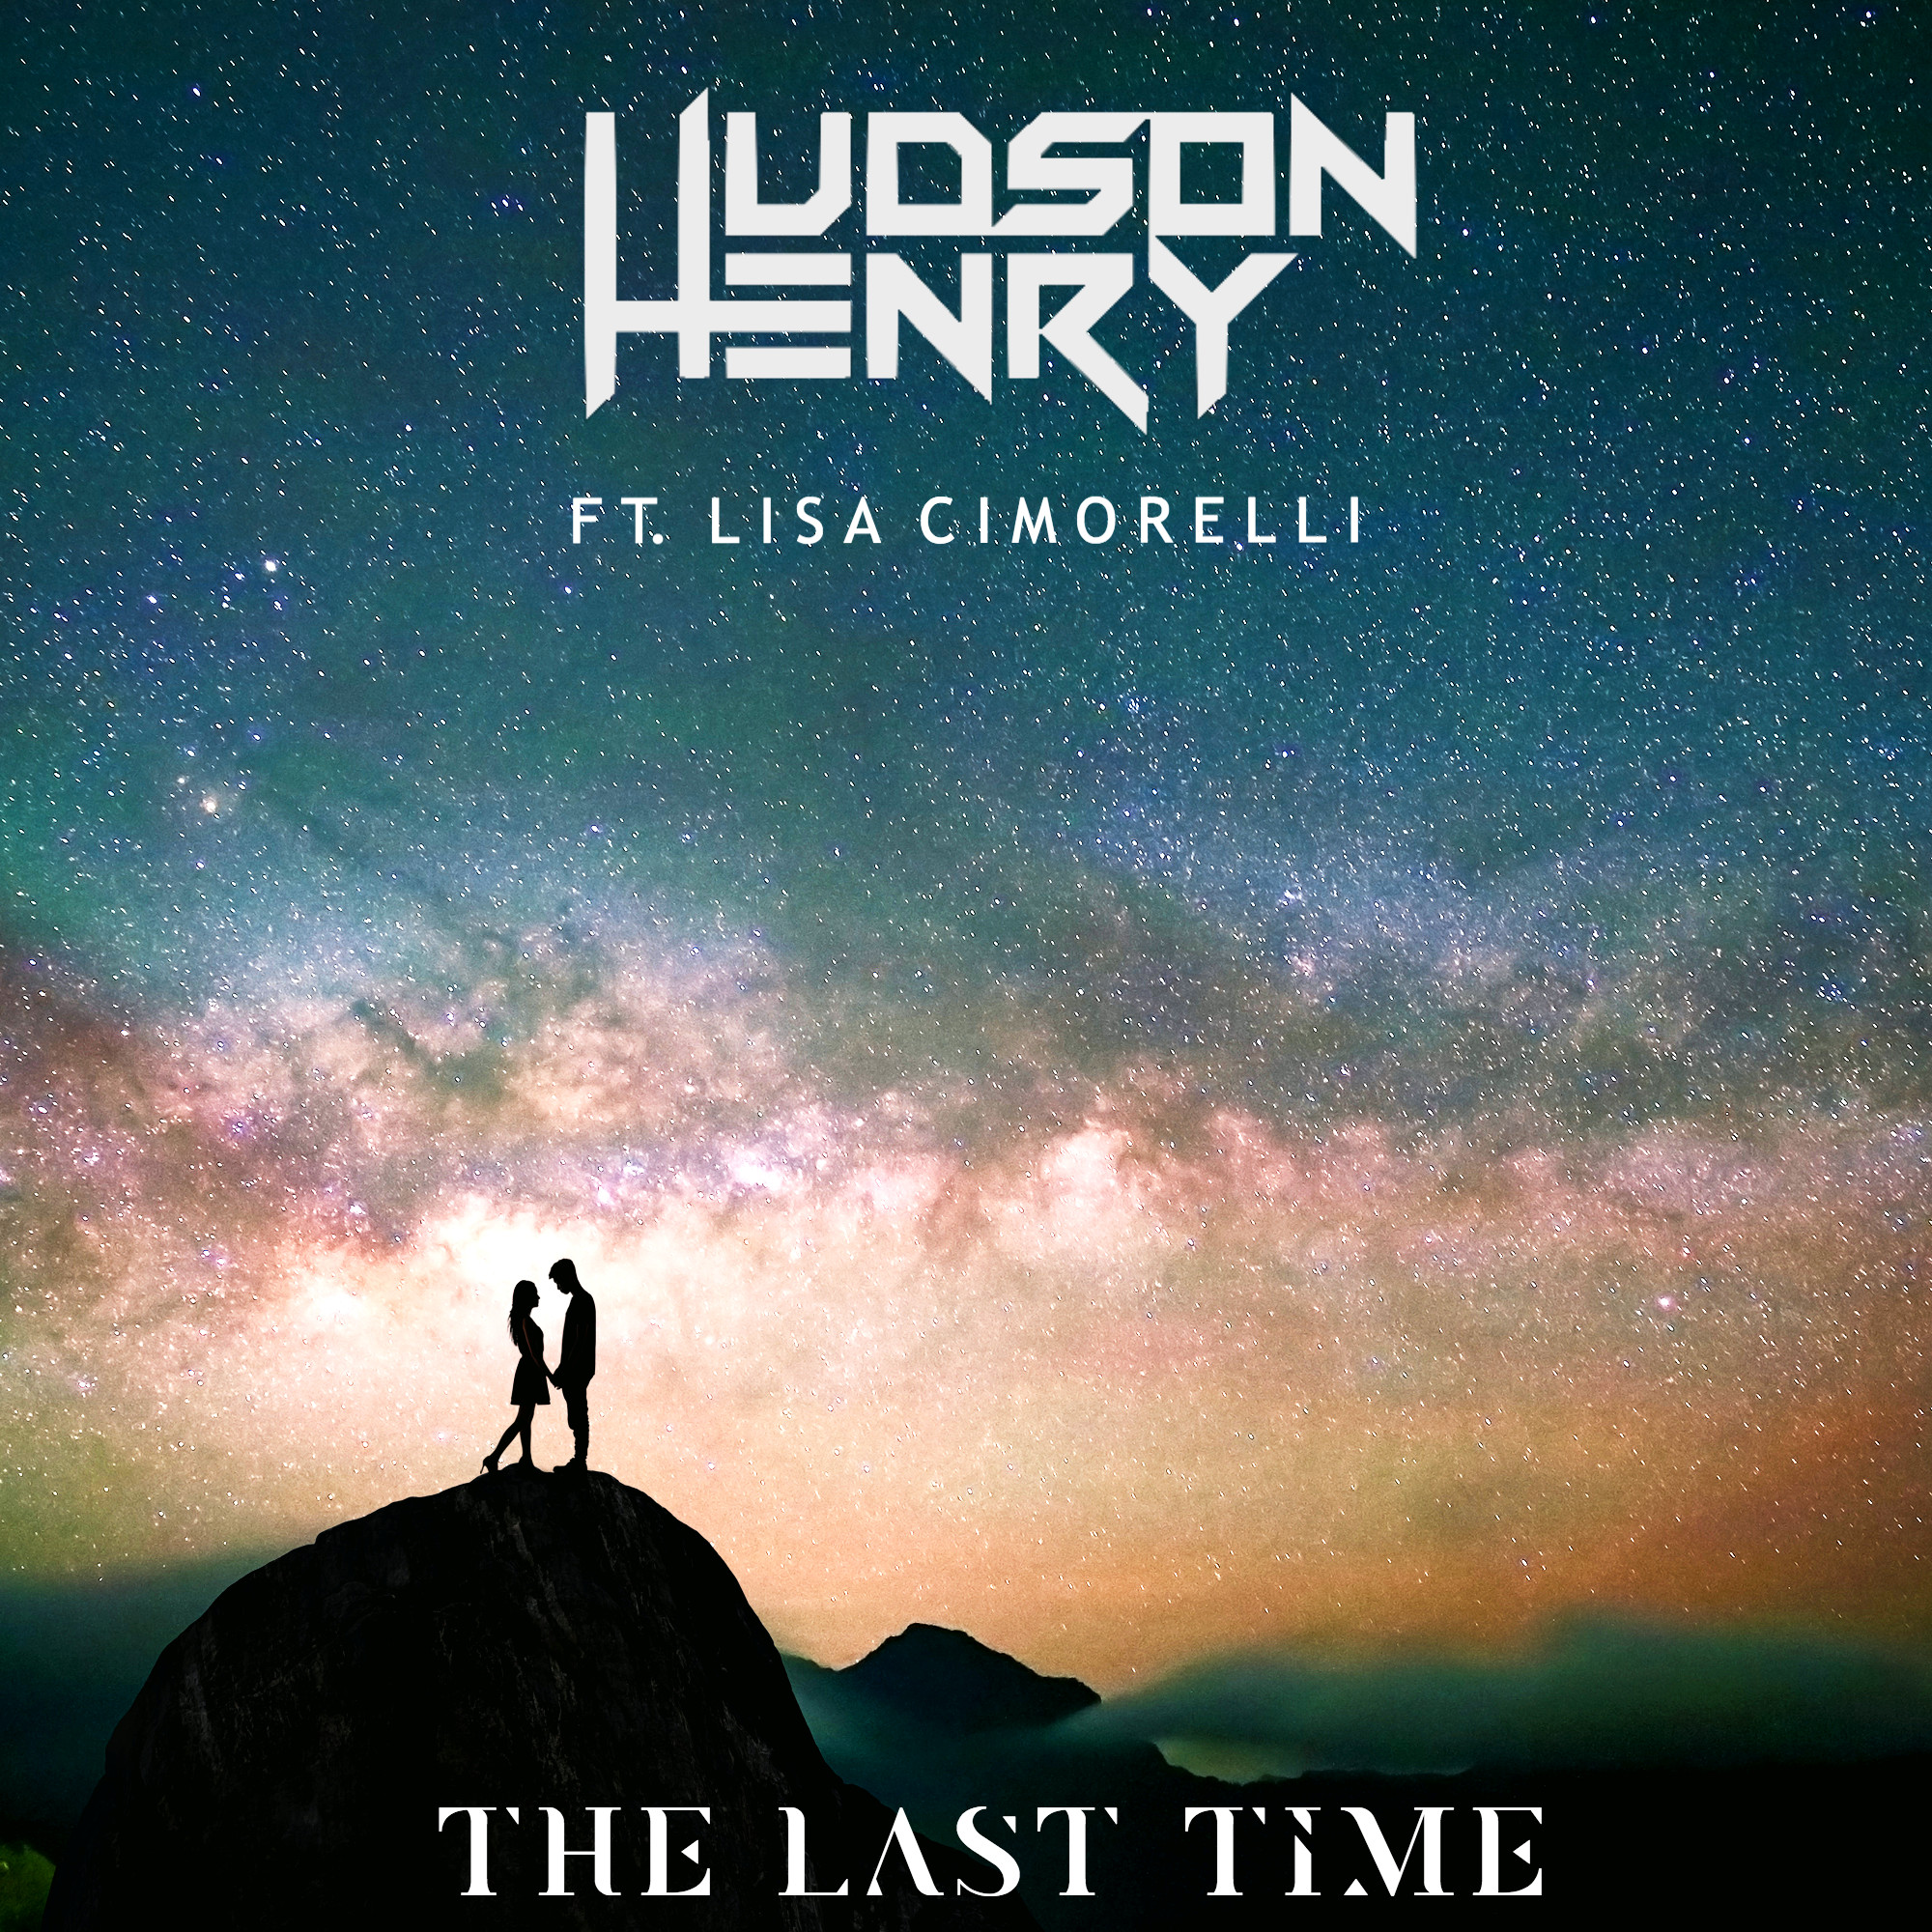 It’s time to ‘Feed Your Fire’ in 2021 with ‘Hudson Henry’ back after 450,000 Streams